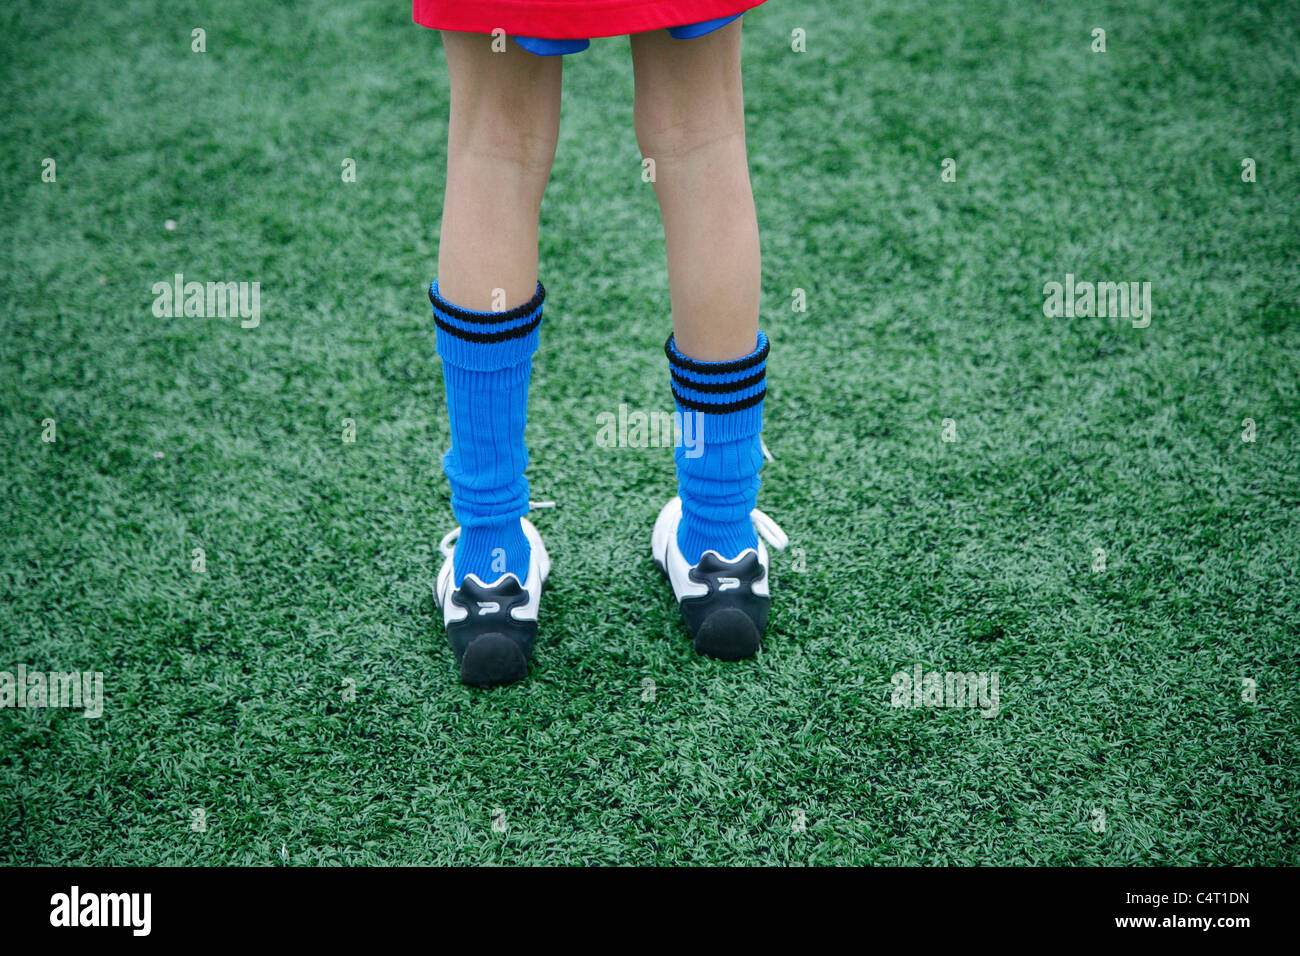 young footballers legs while stood on pitch Stock Photo